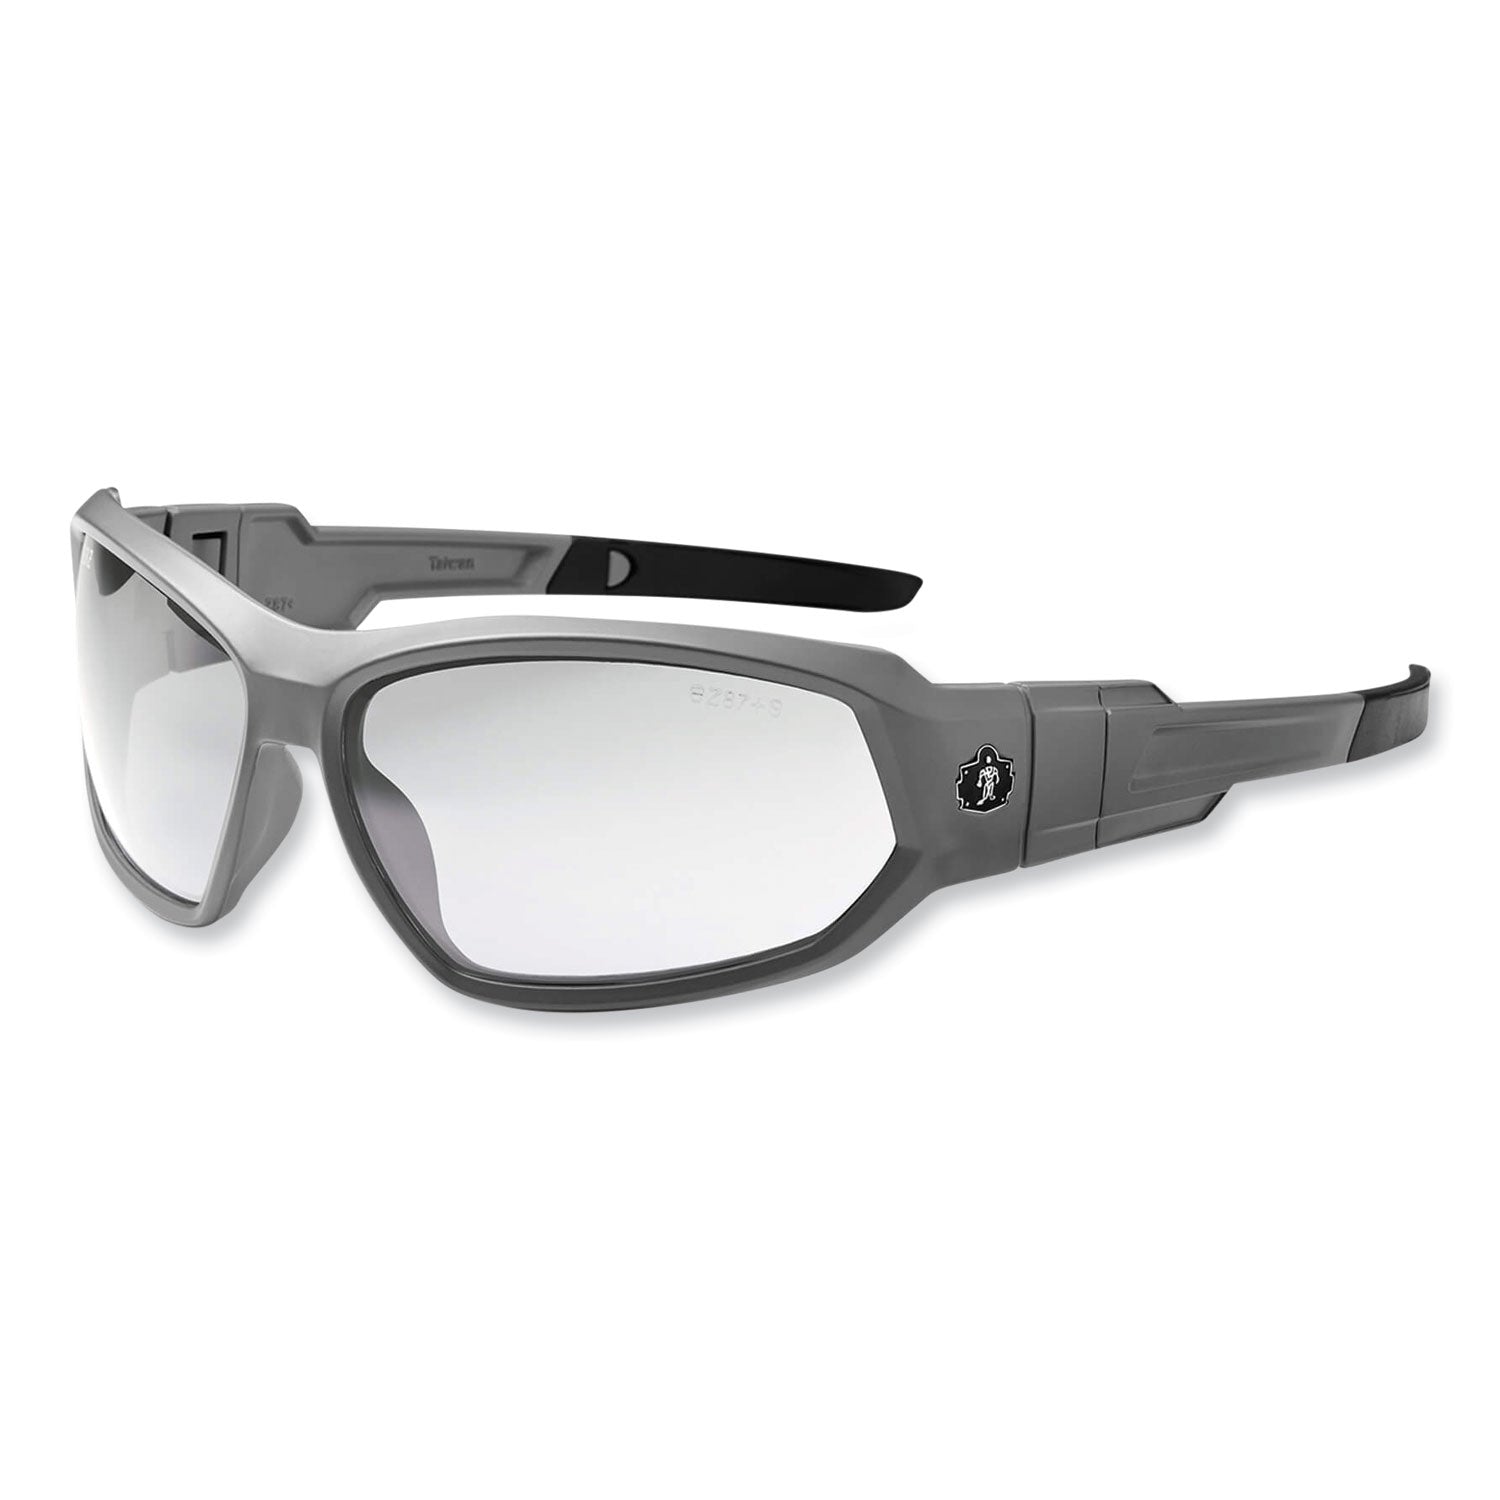 skullerz-loki-safety-glasses-goggles-matte-gray-nylon-impact-frame-clear-polycarbonate-lens-ships-in-1-3-business-days_ego56100 - 1